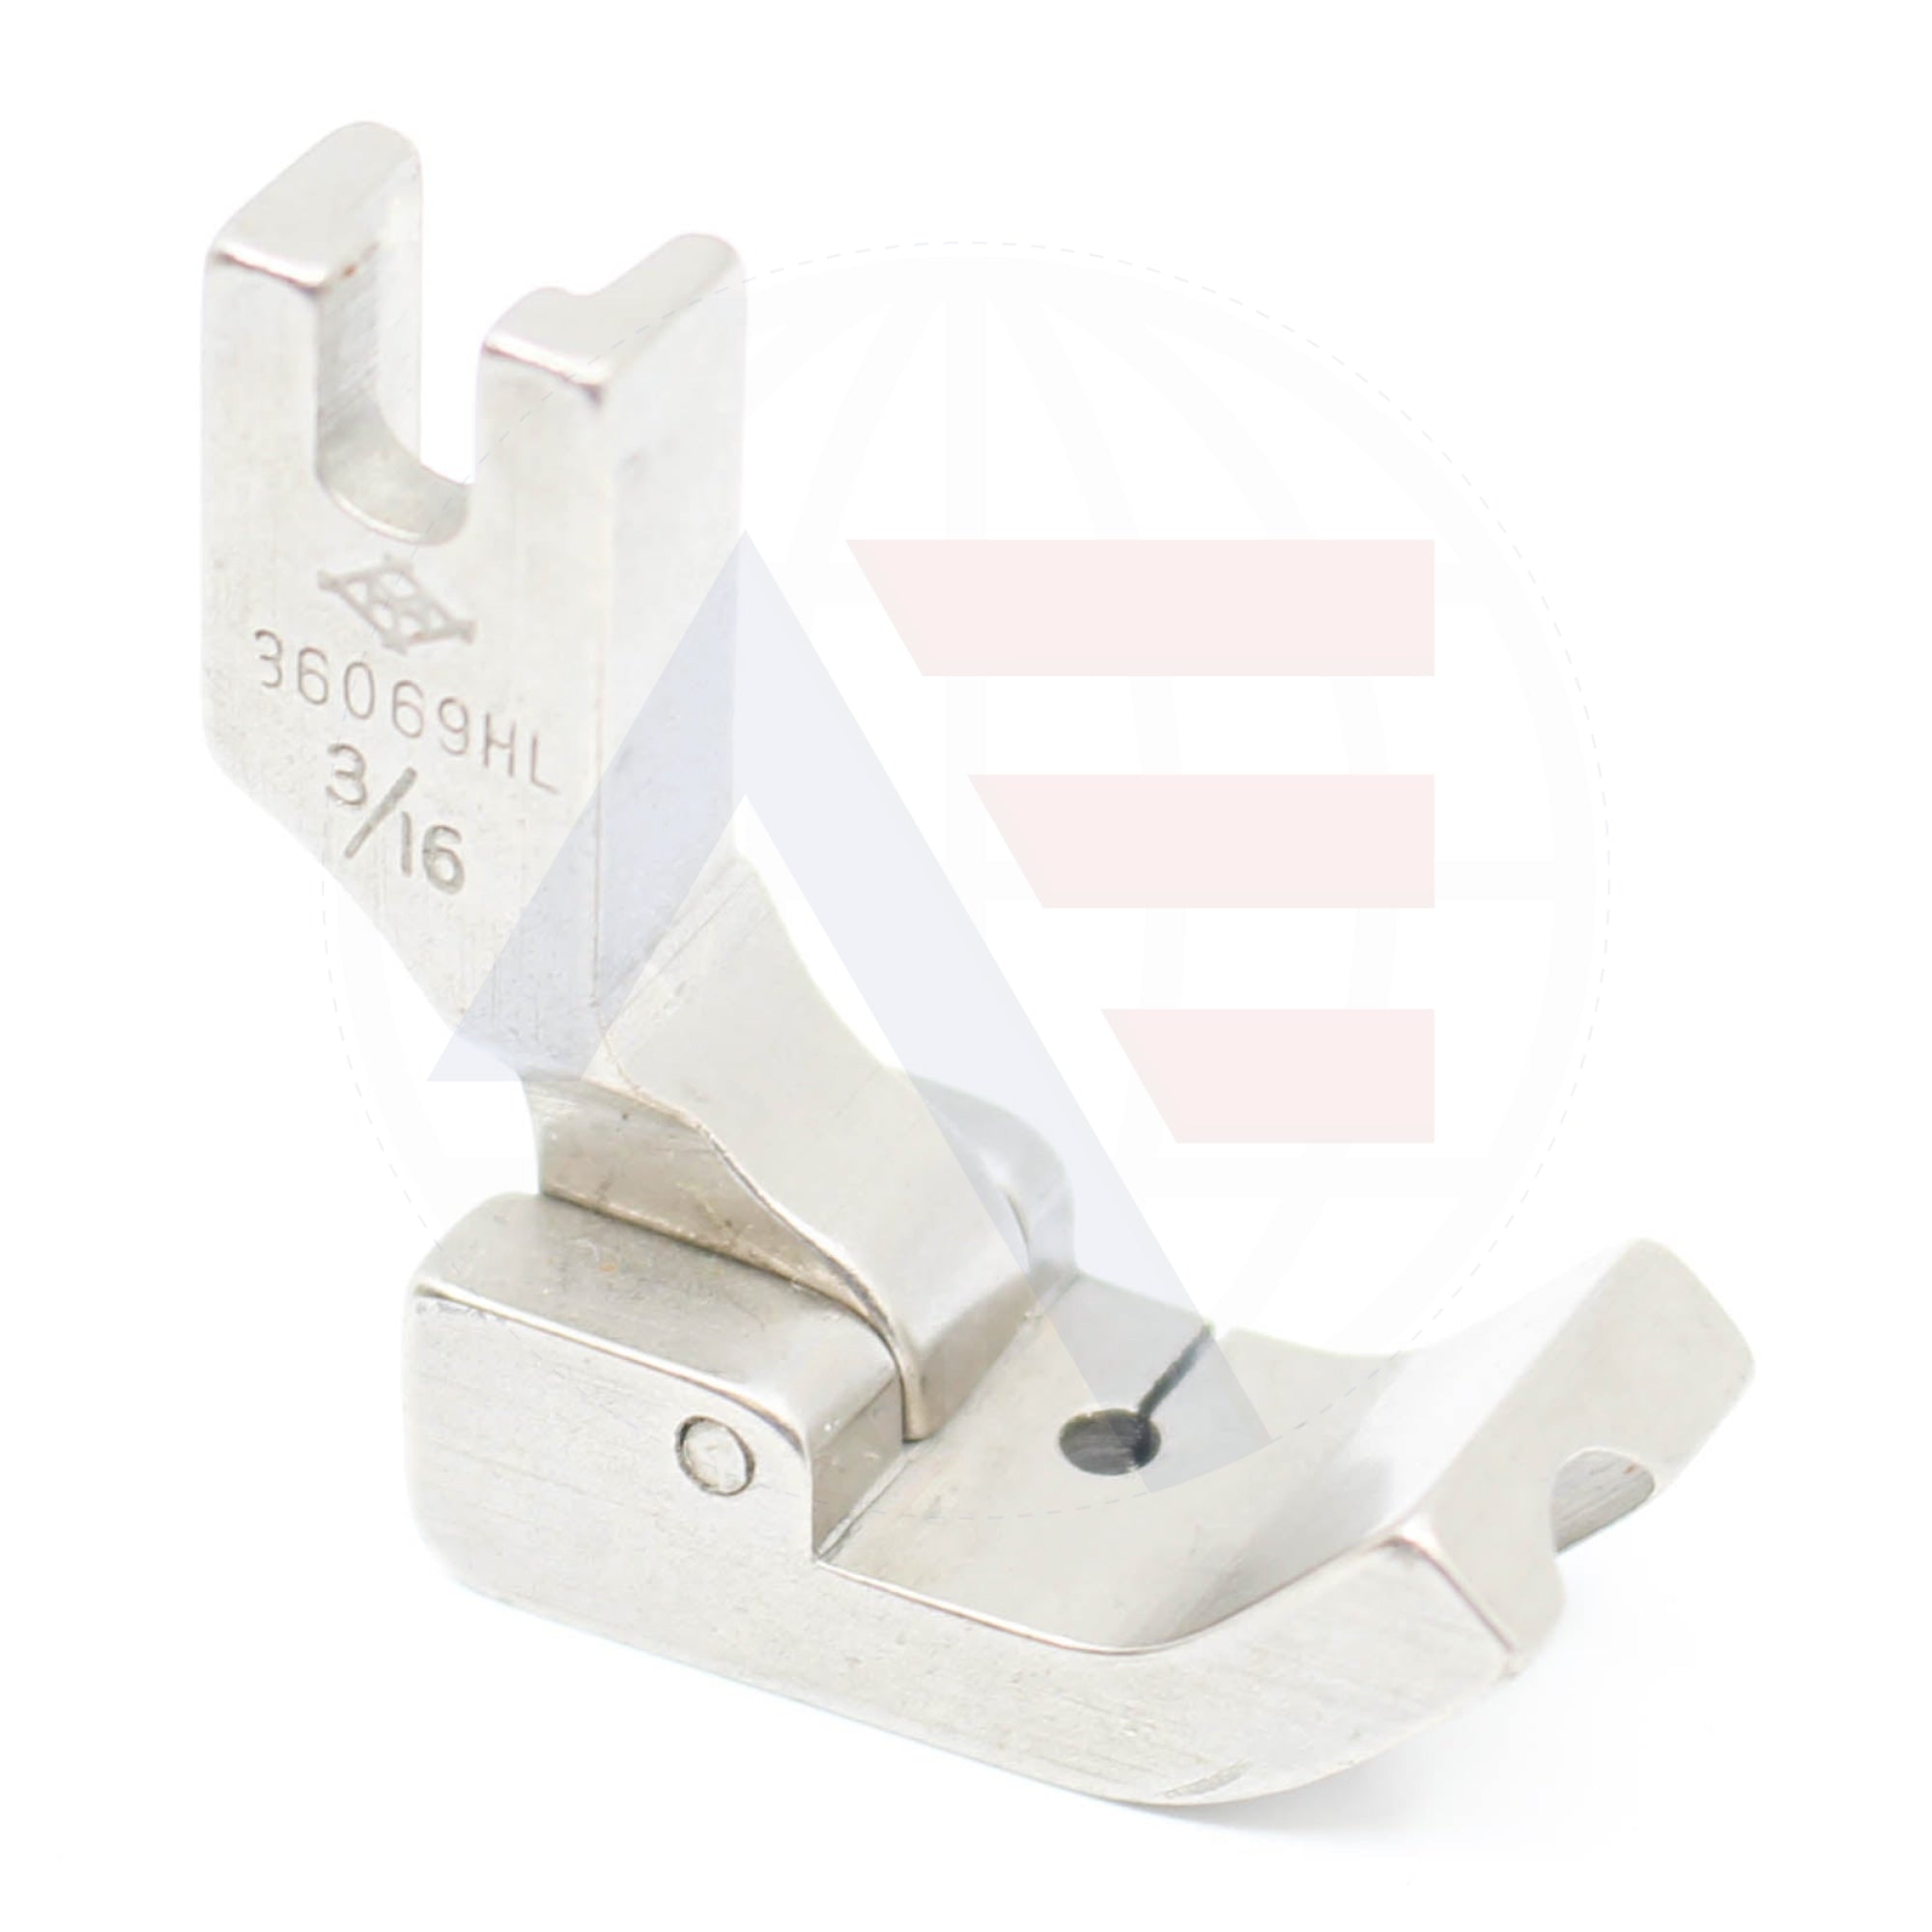 36069Lhx3/16 Piping Foot Sewing Machine Spare Parts